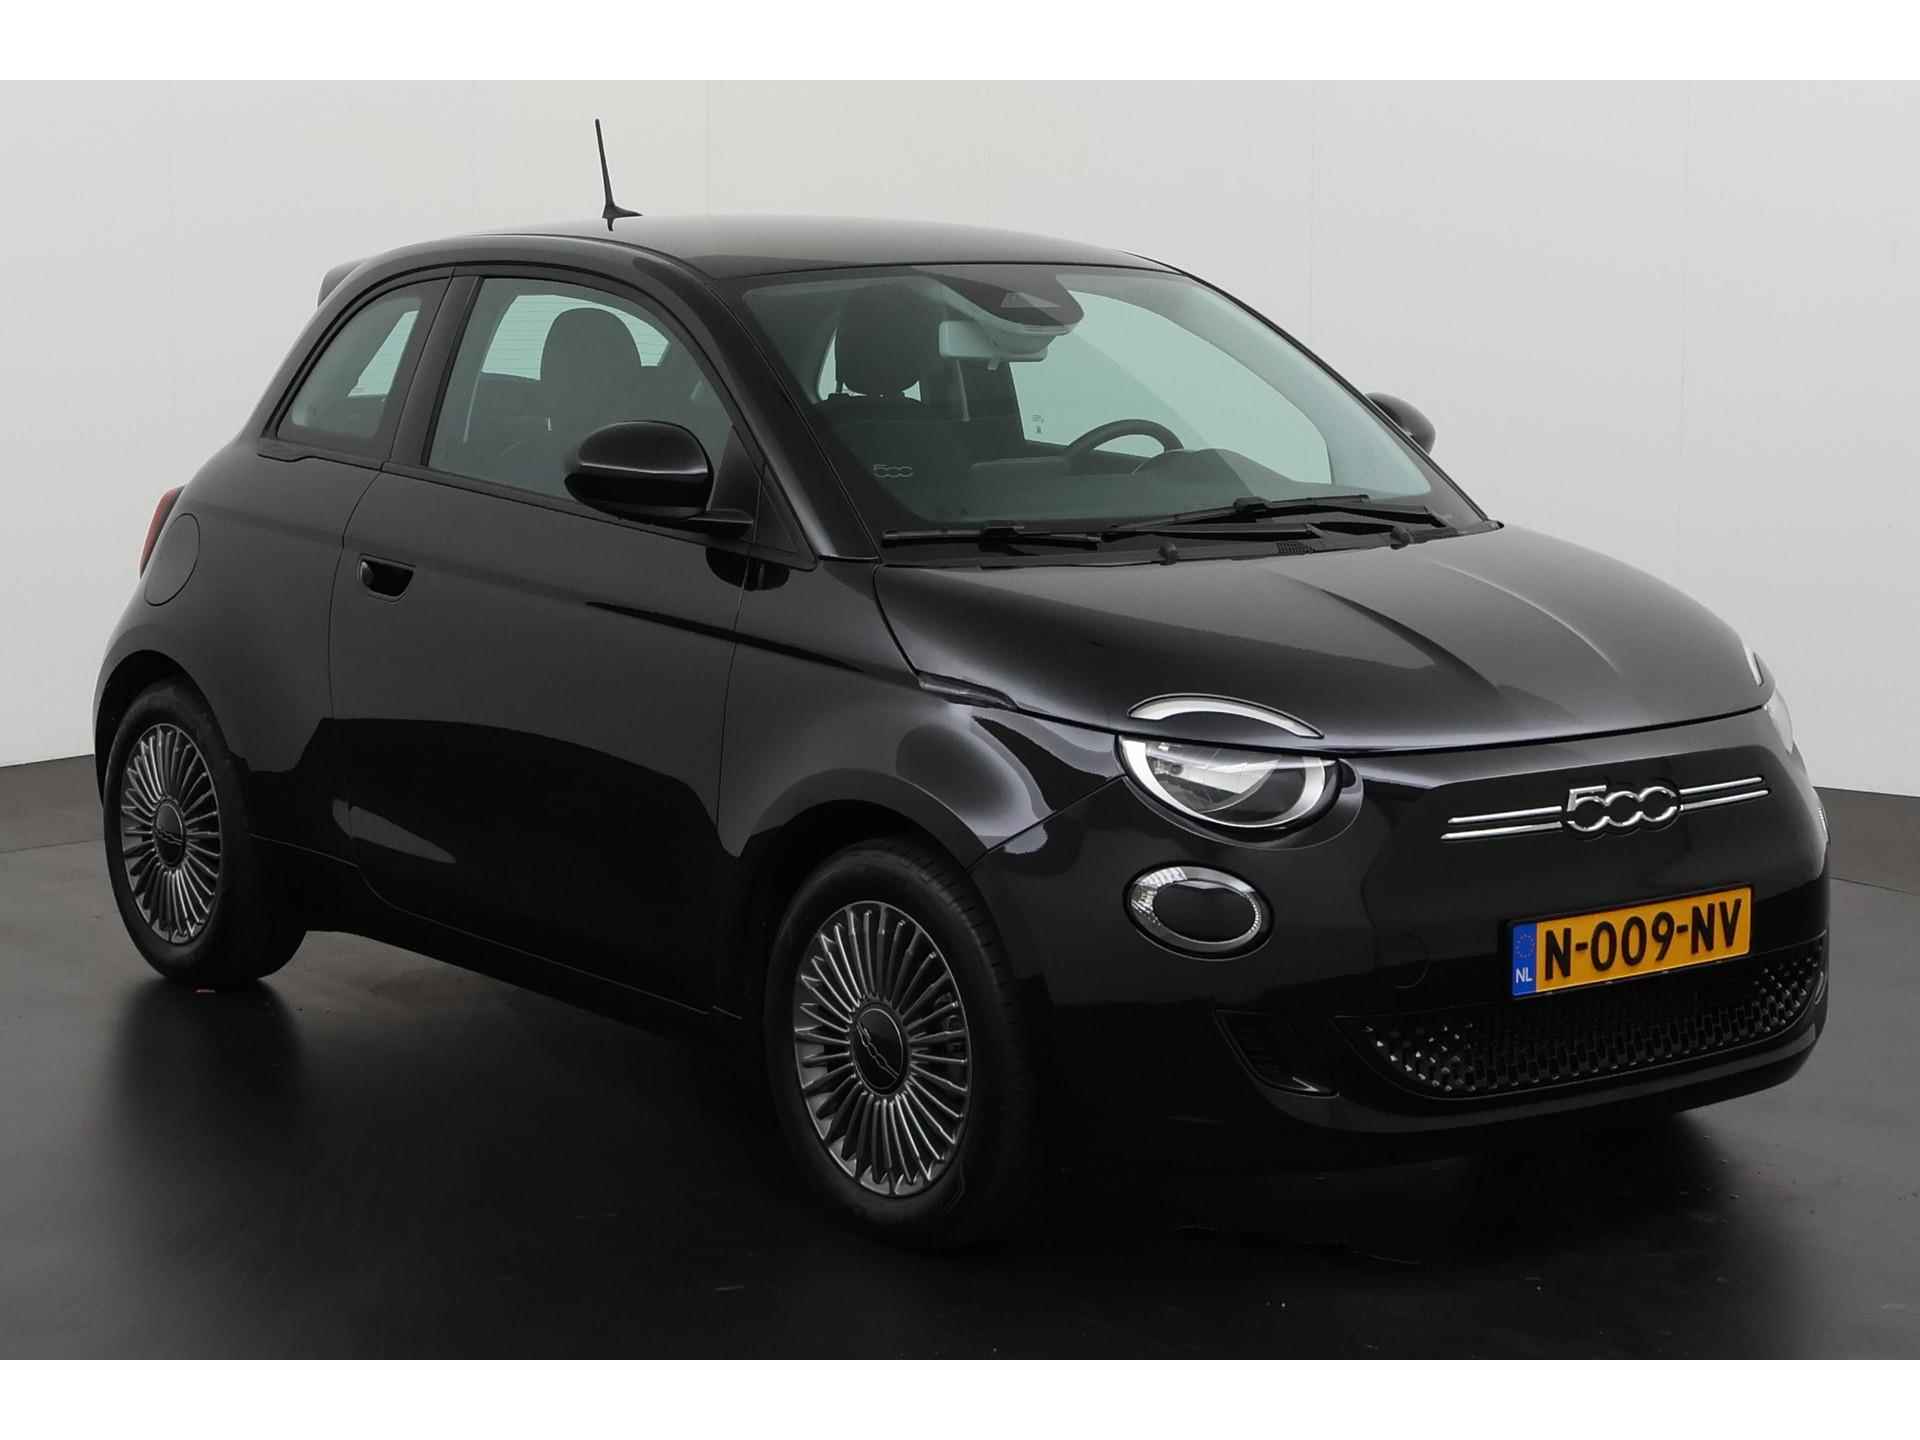 Fiat 500 RED 24 kWh 3-fase | 16.945,- na subsidie | Apple/Android Carplay | Digital Cockpit | Stoelverwarming | Zondag Open! - 32/43